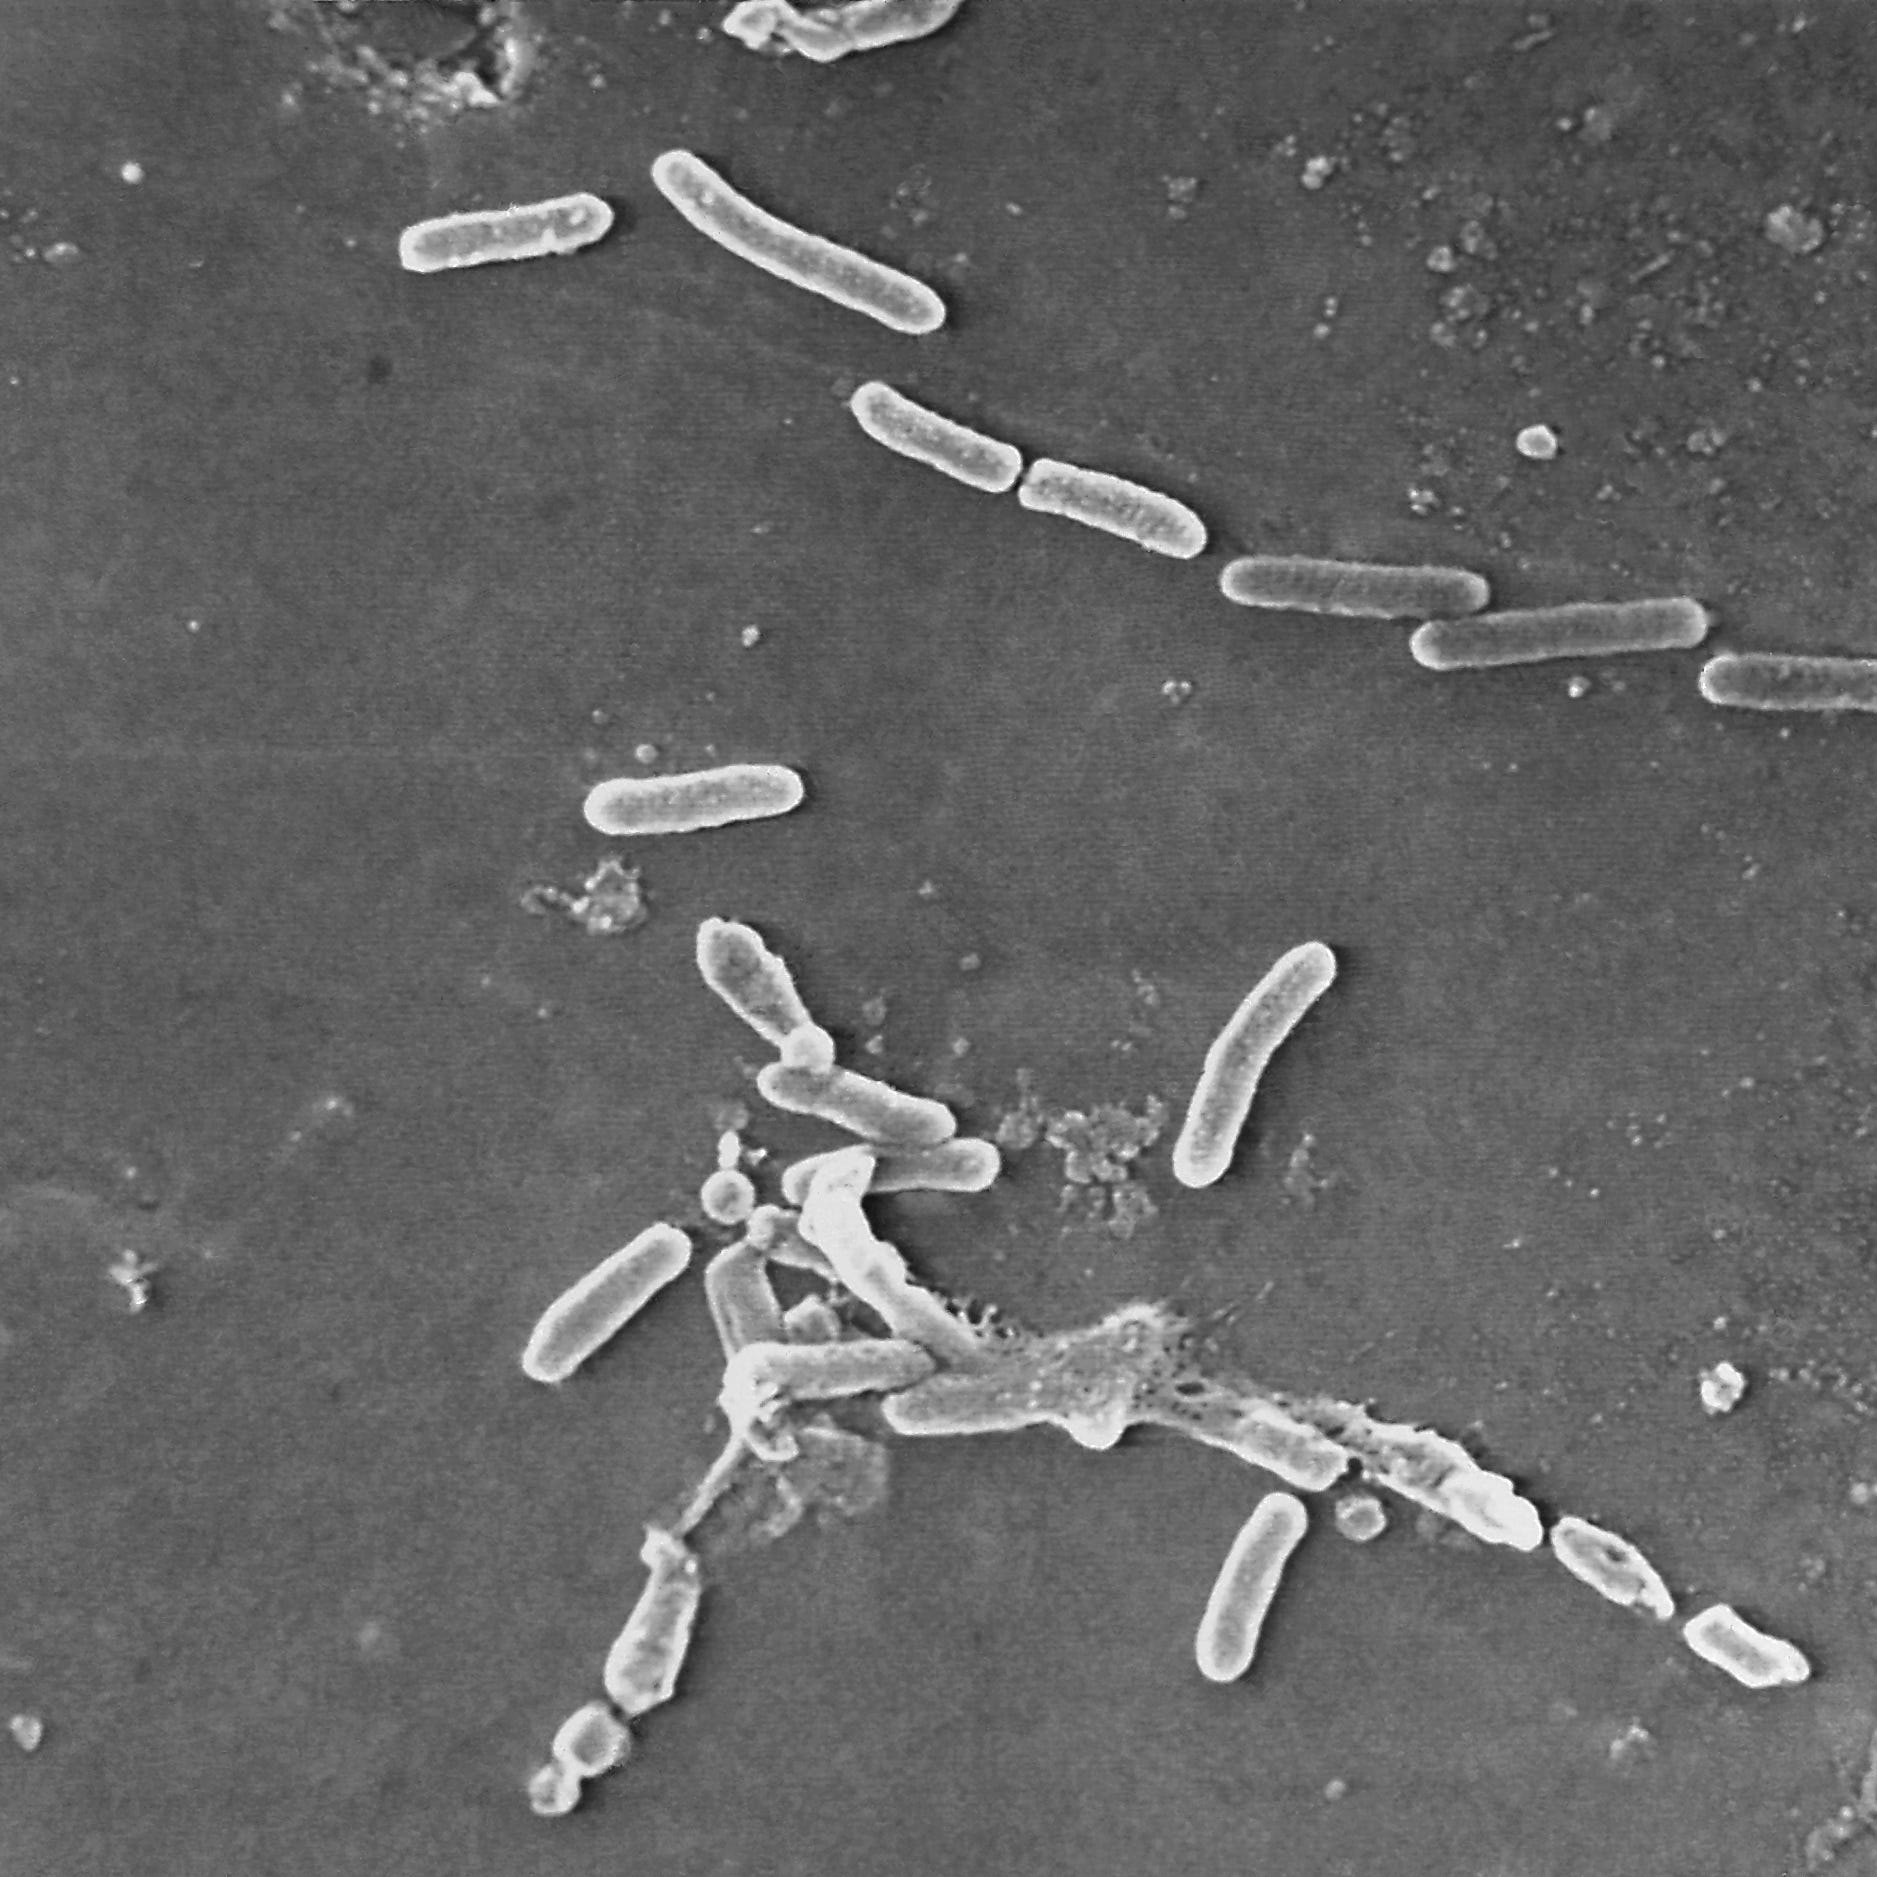 This scanning electron microscope image made available by The Centers for Disease Control and Prevention shows rod-shaped Pseudomonas aeruginosa bacteria. U.S. officials are reporting two more deaths and additional cases of vision loss linked to eyedrops tainted with the drug-resistant bacteria. The eyedrops from EzriCare and Delsam Phama were recalled in February 2023 and health authorities are tracking infections as they investigate the outbreak.